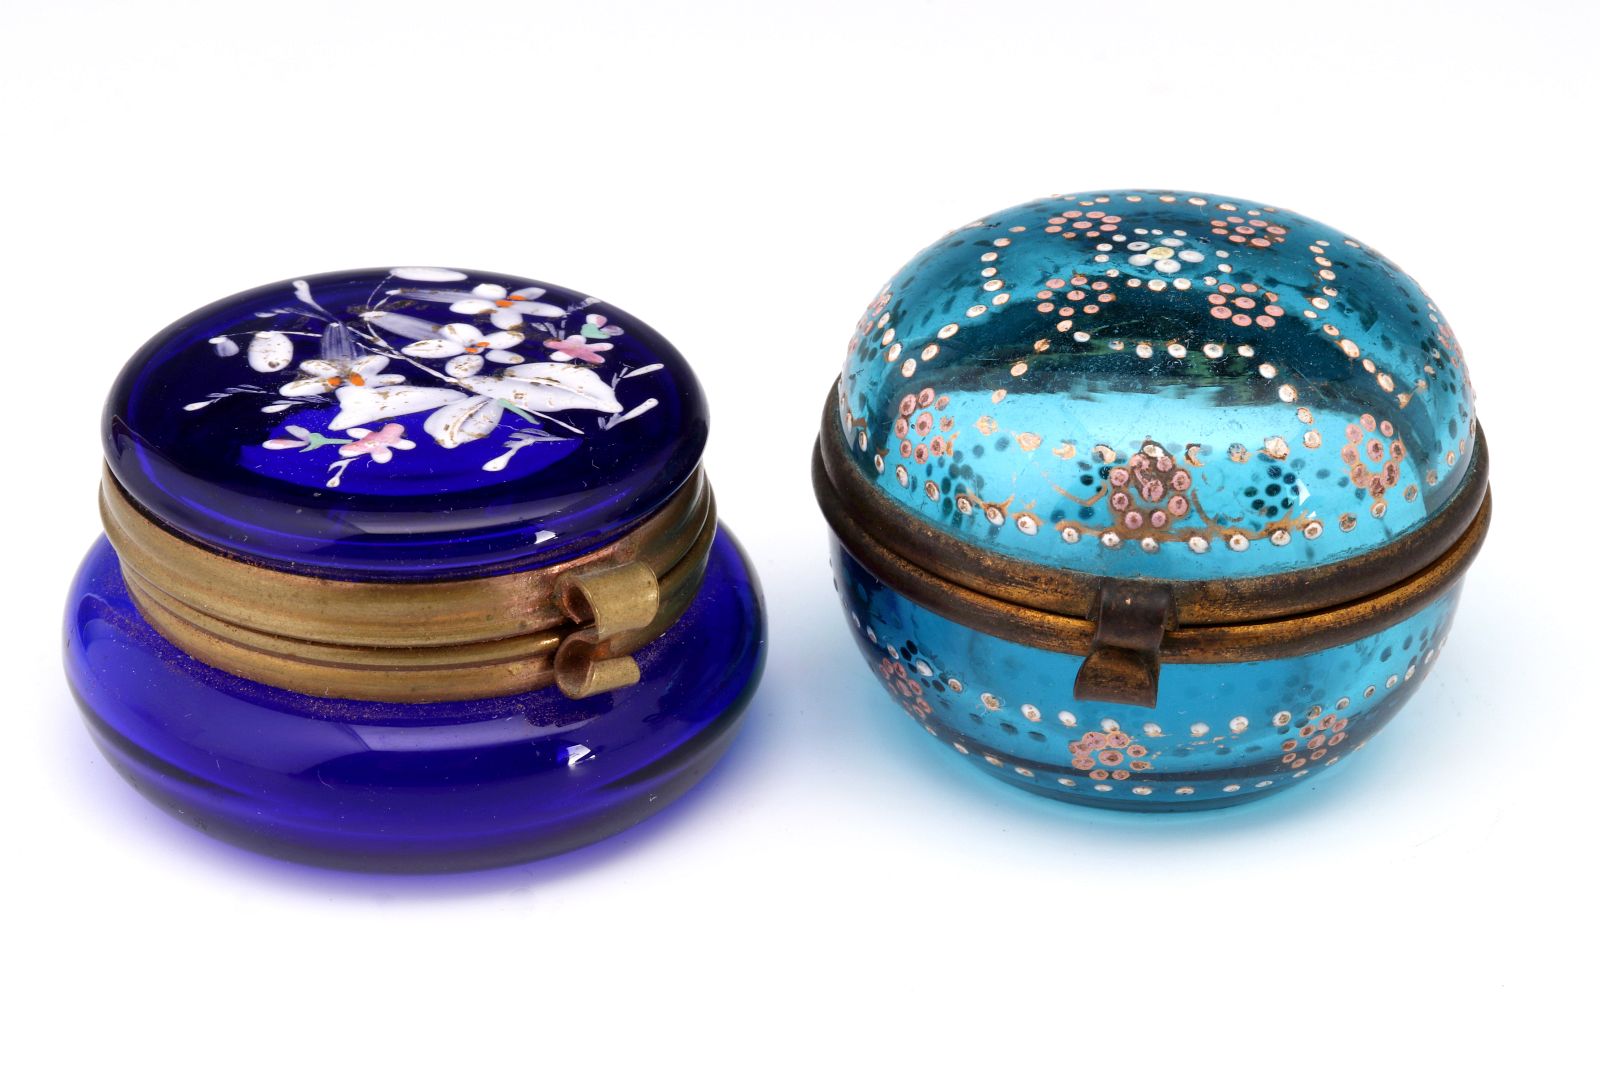 TWO ENAMELED VICTORIAN ART GLASS TRINKET BOXES